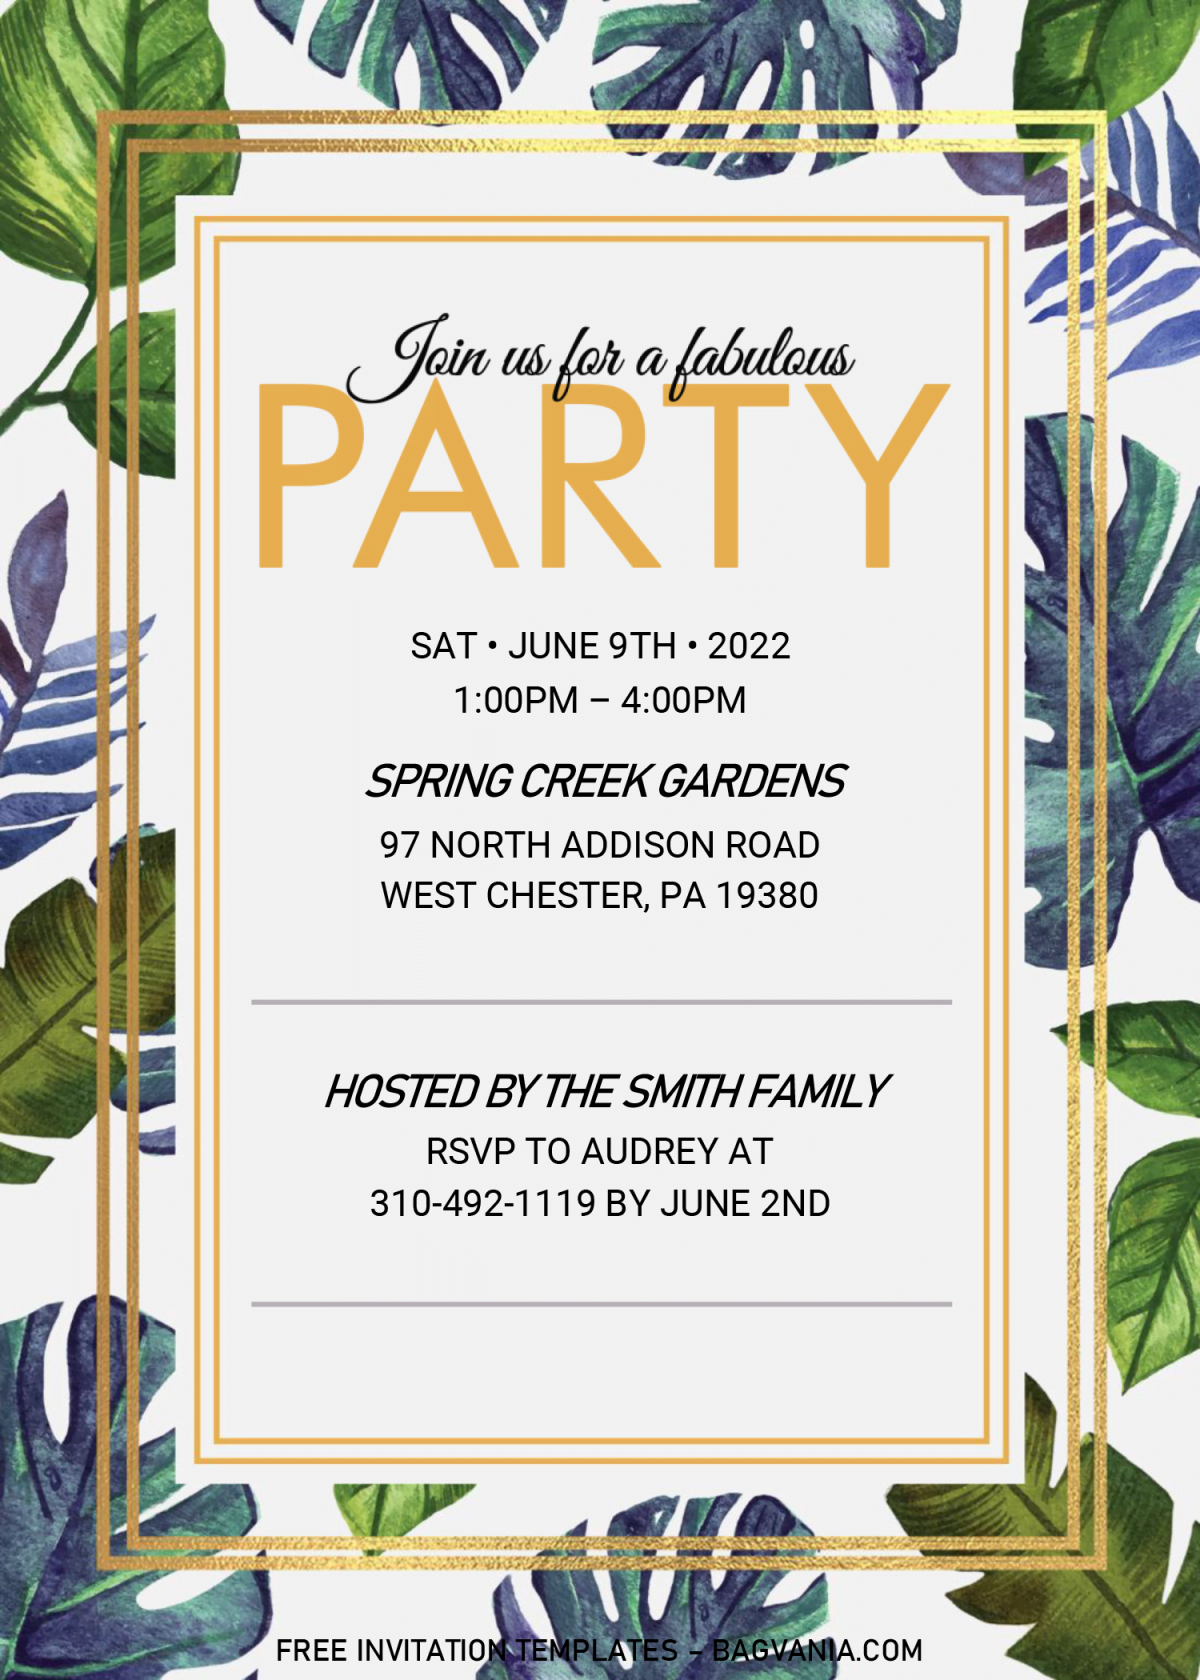 Summer Party Invitation Templates - Editable .Docx and has 